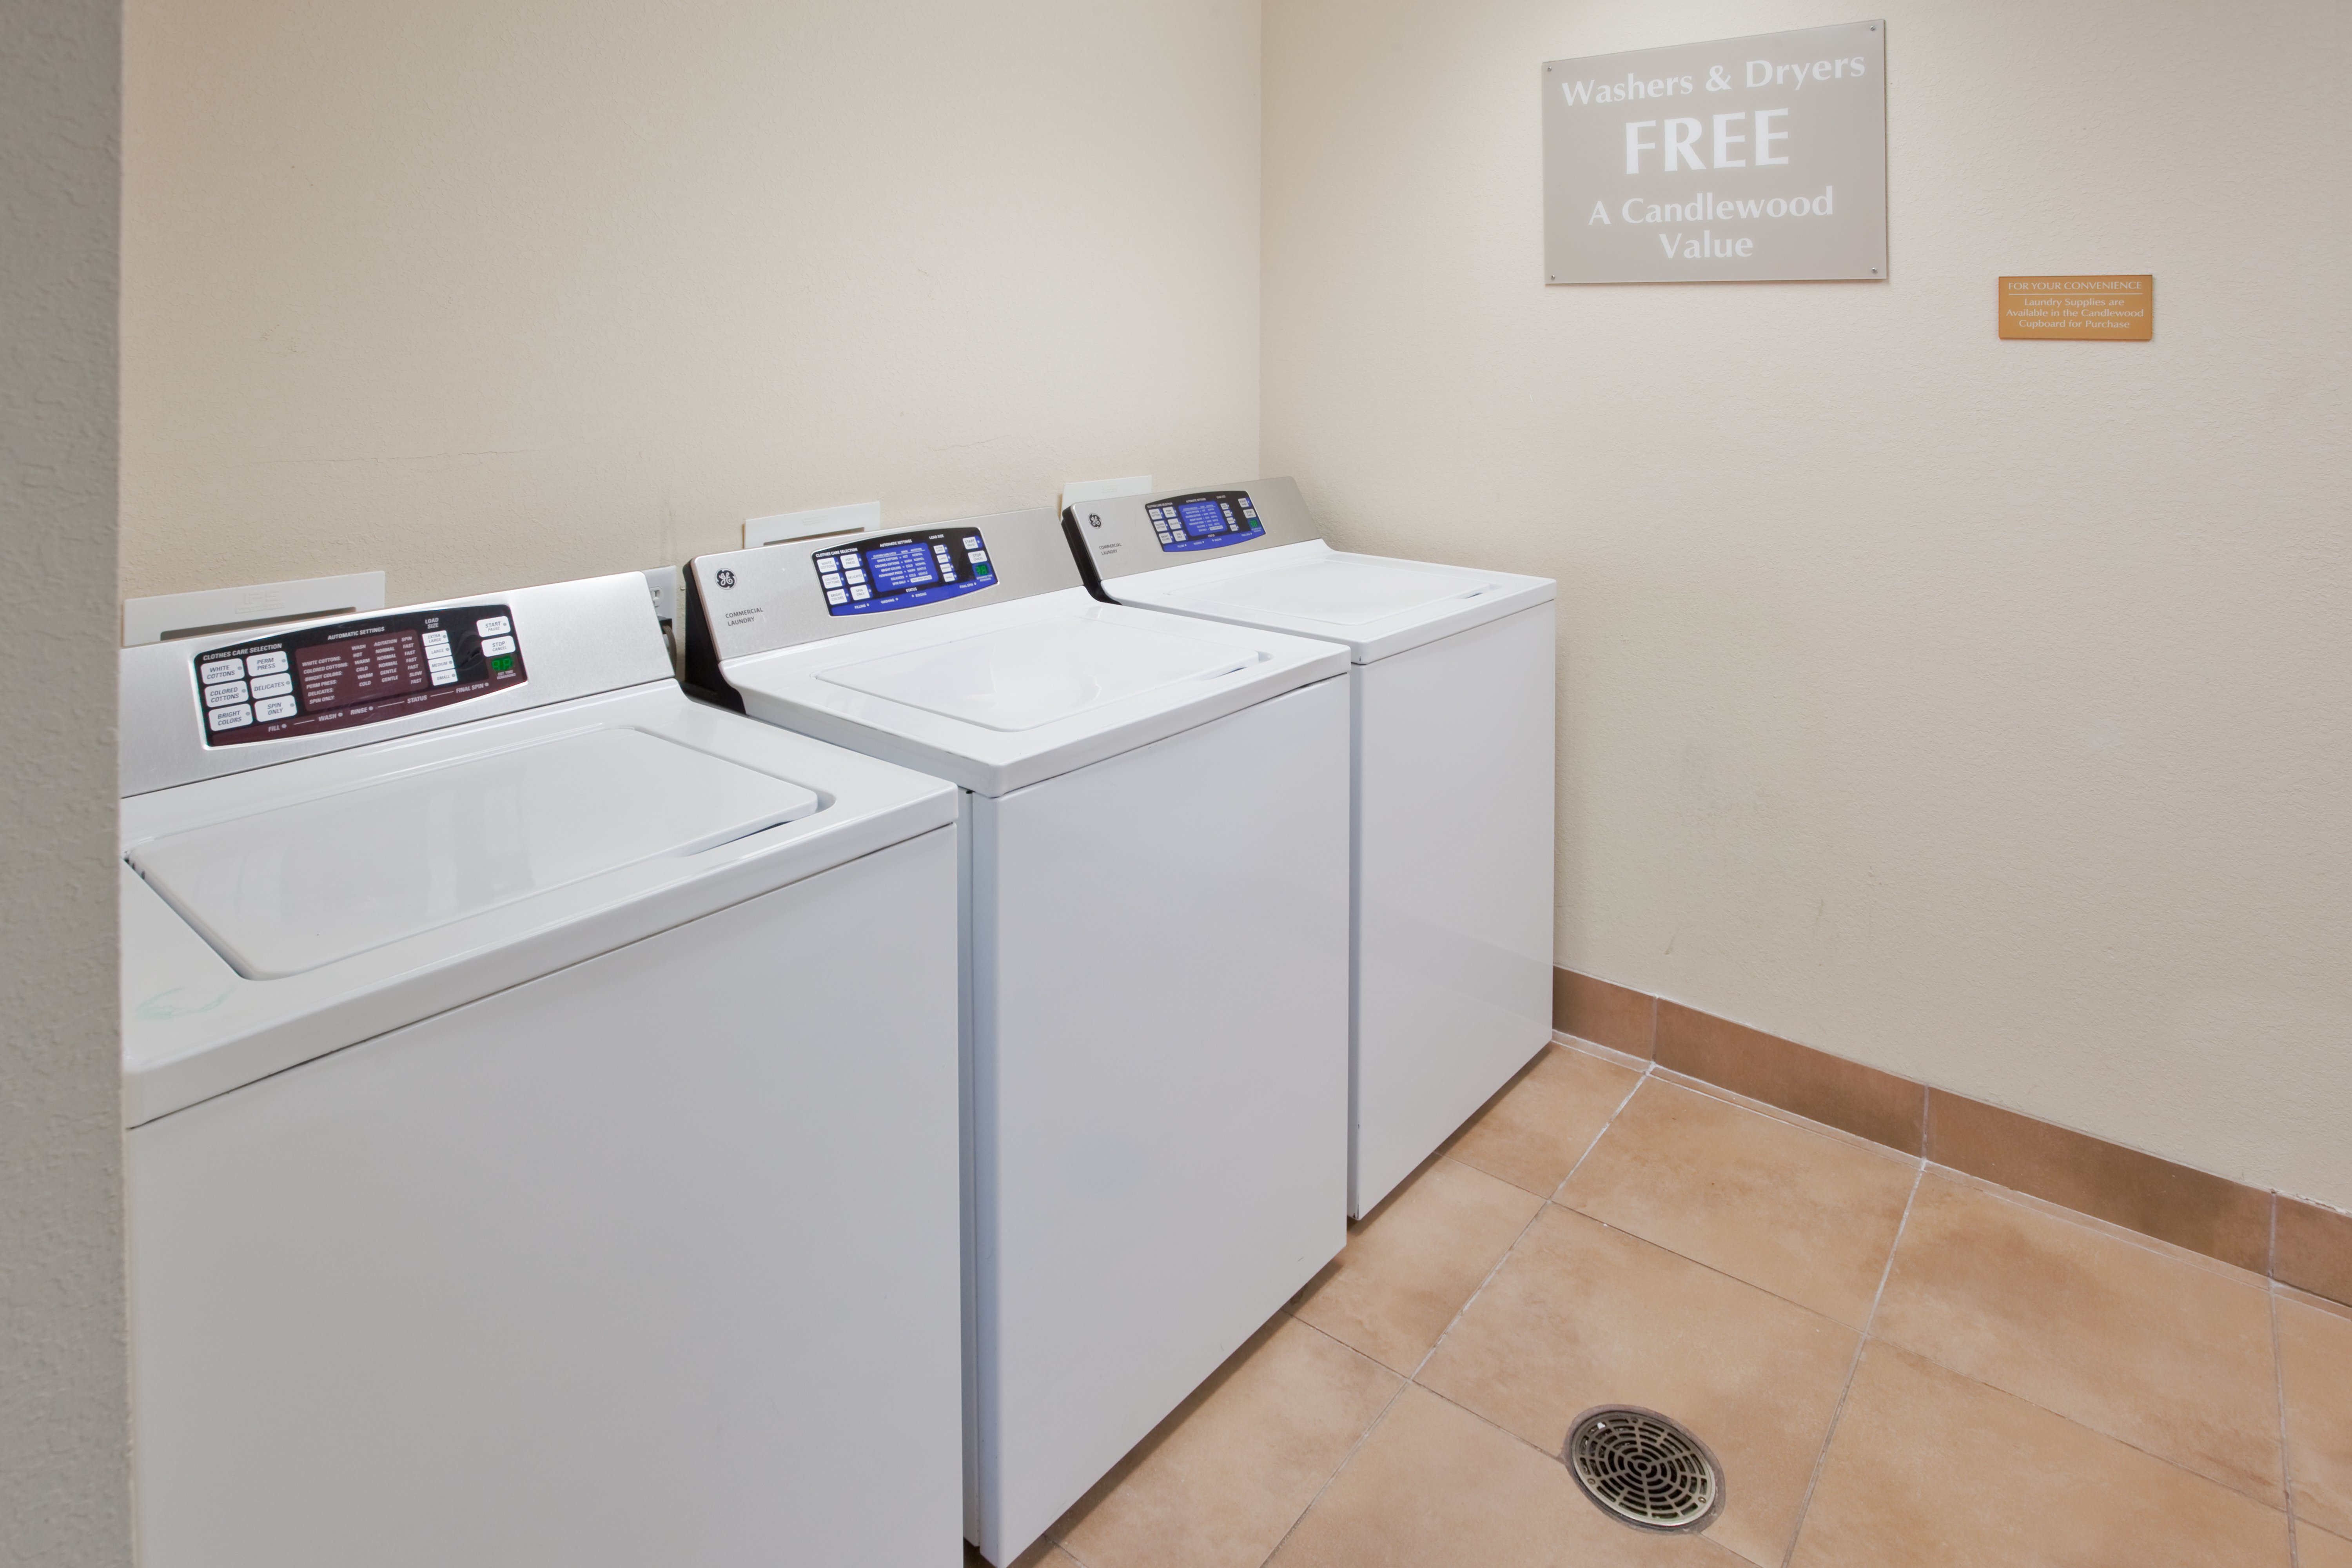 Complimentary Guest Laundry - no quarters required!